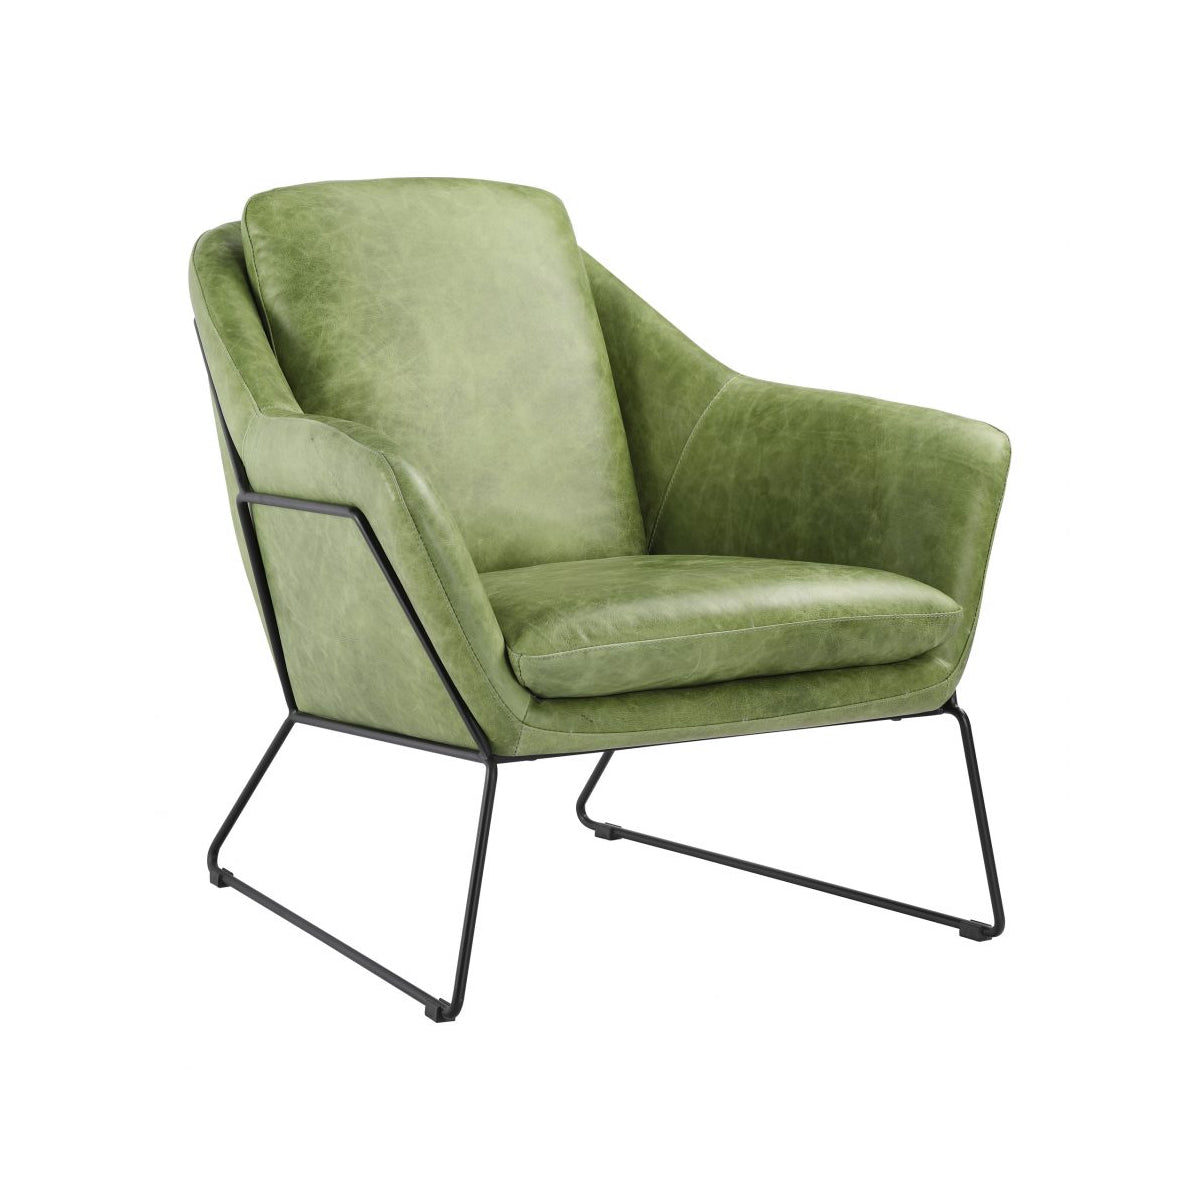 Load image into Gallery viewer, Greer Club Chair GreenOccasional Chair Moe&amp;#39;s  Green   Four Hands, Burke Decor, Mid Century Modern Furniture, Old Bones Furniture Company, Old Bones Co, Modern Mid Century, Designer Furniture, https://www.oldbonesco.com/
